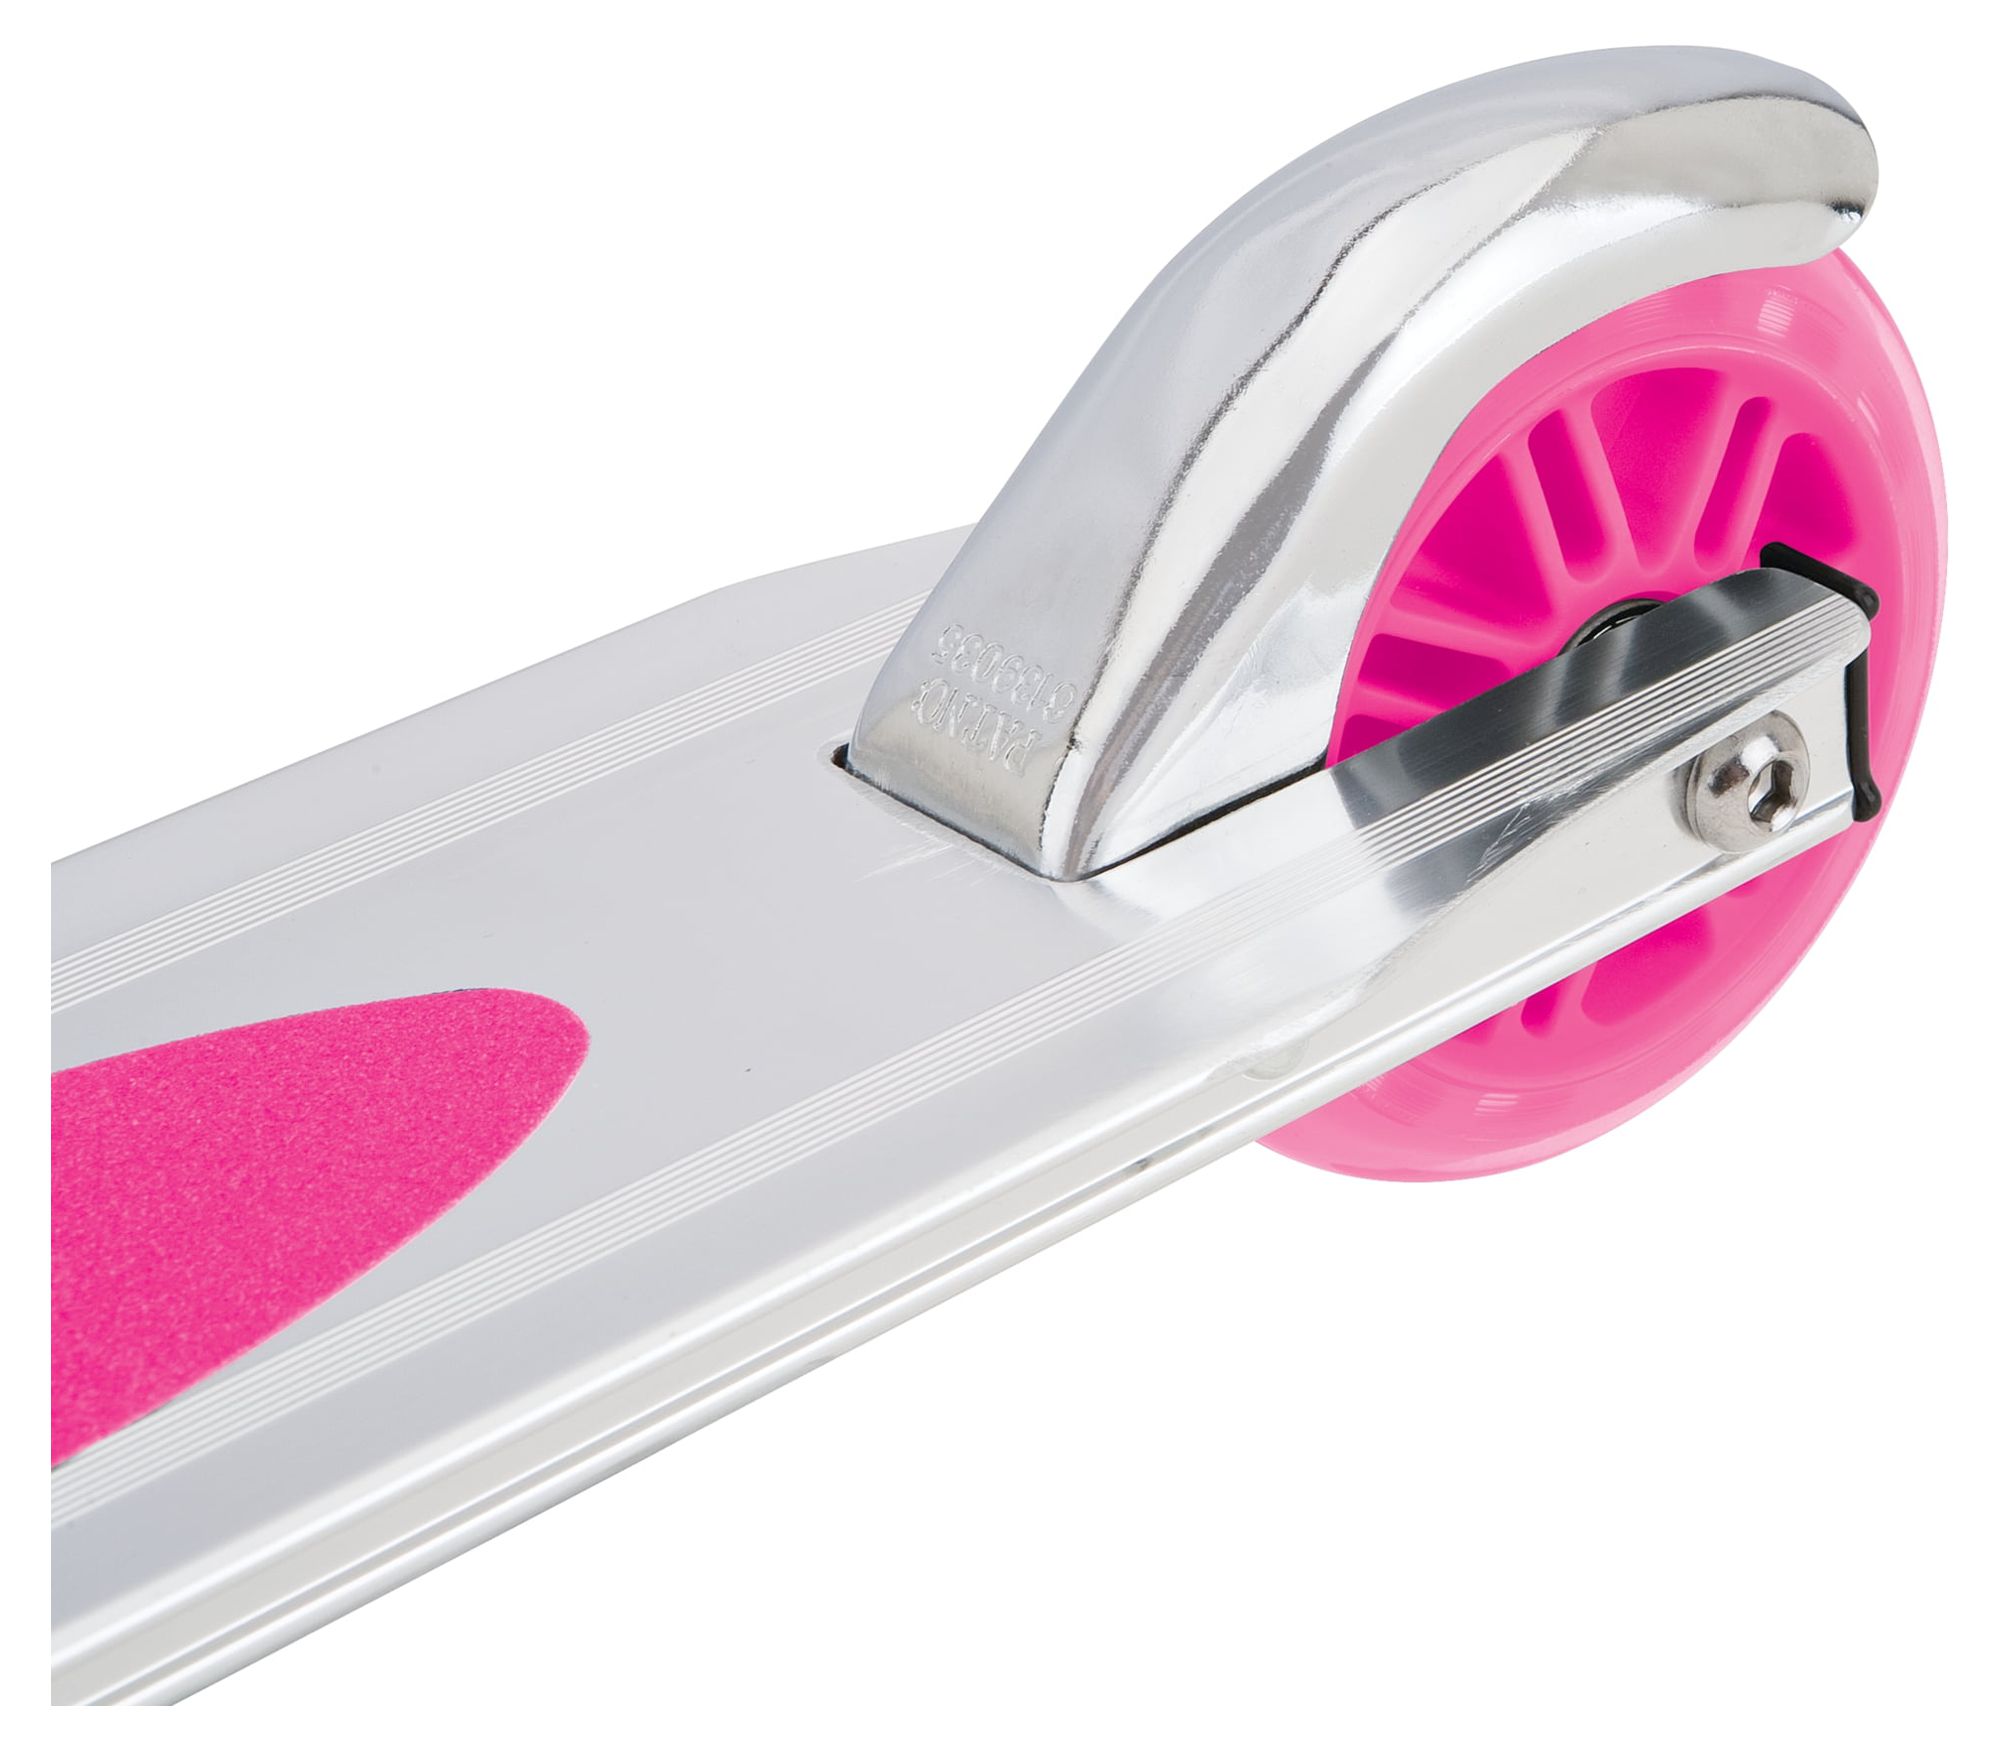 Razor A Kick Scooter for Kids - Pink, Lightweight, Foldable, Aluminum Frame, for Child Ages 5+ - image 5 of 9